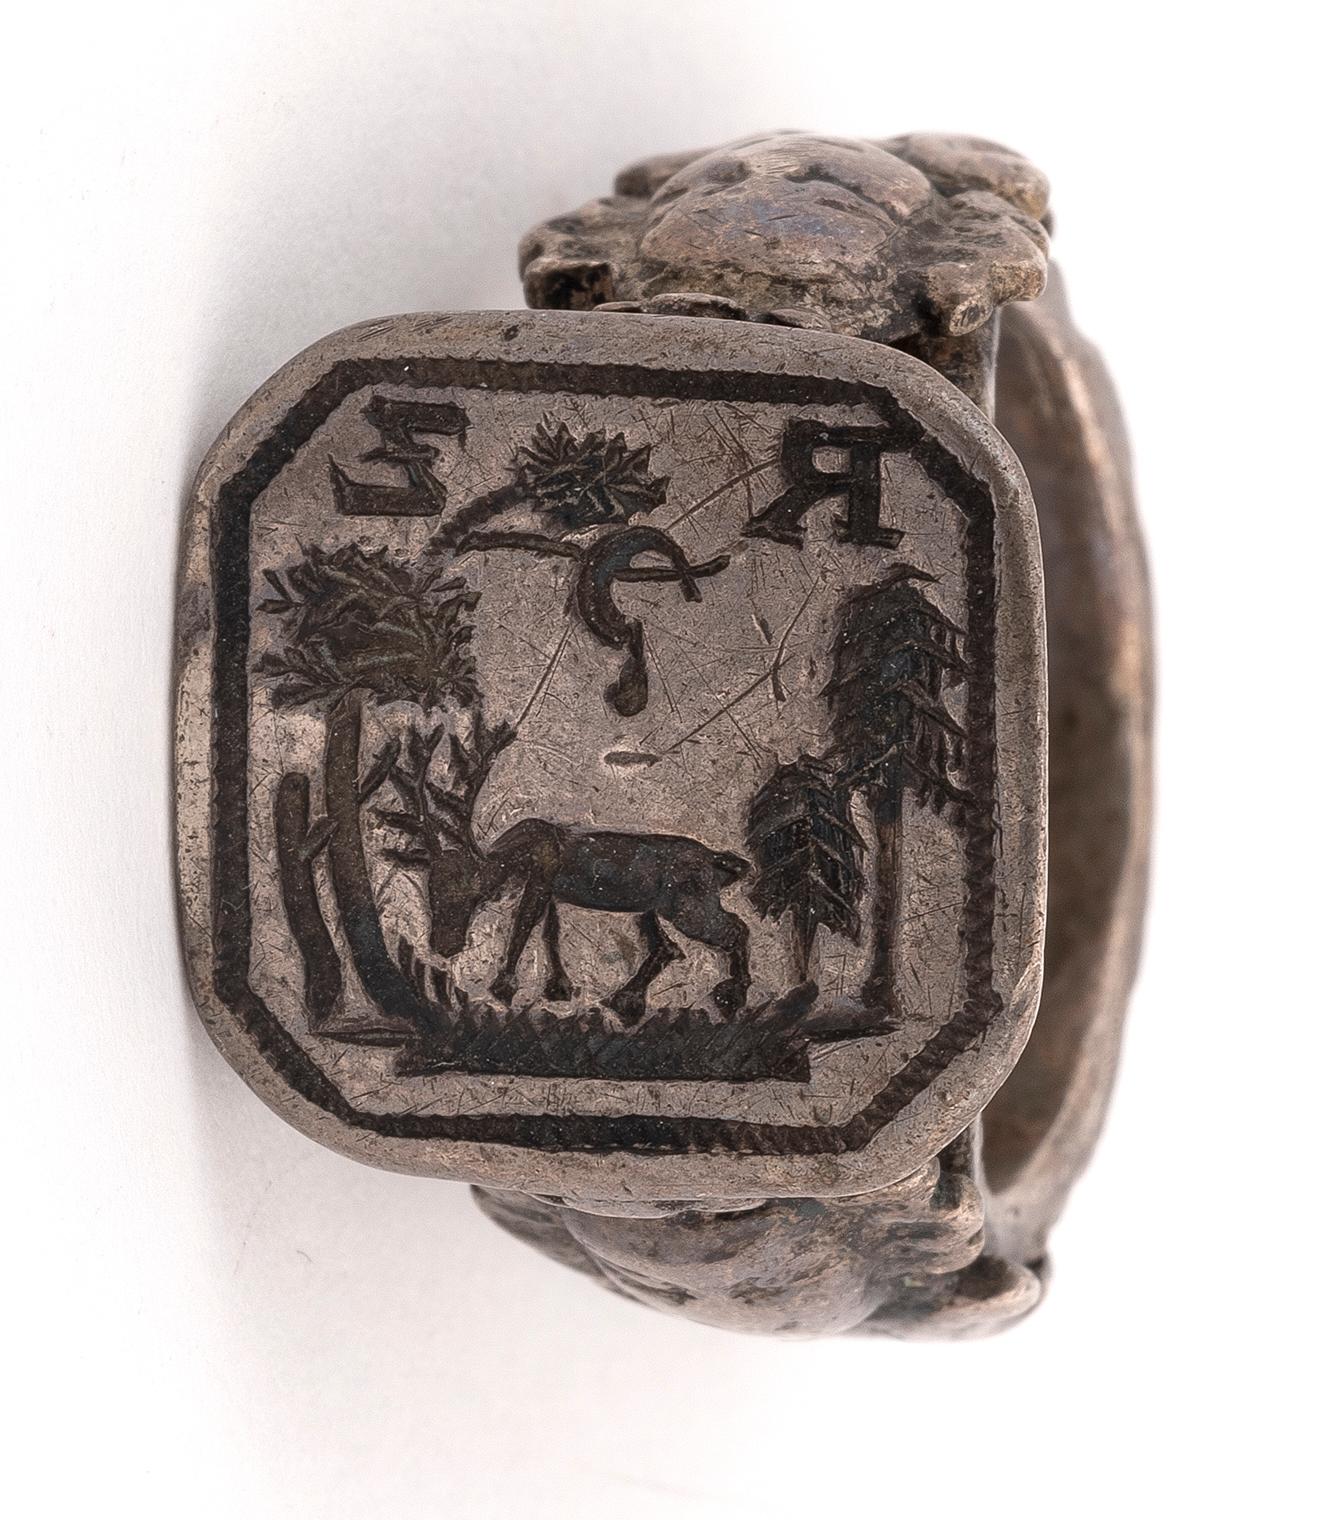 The silver ring with an octagonal plaque carved with merchant's symbols.
Ring size 8 1/4